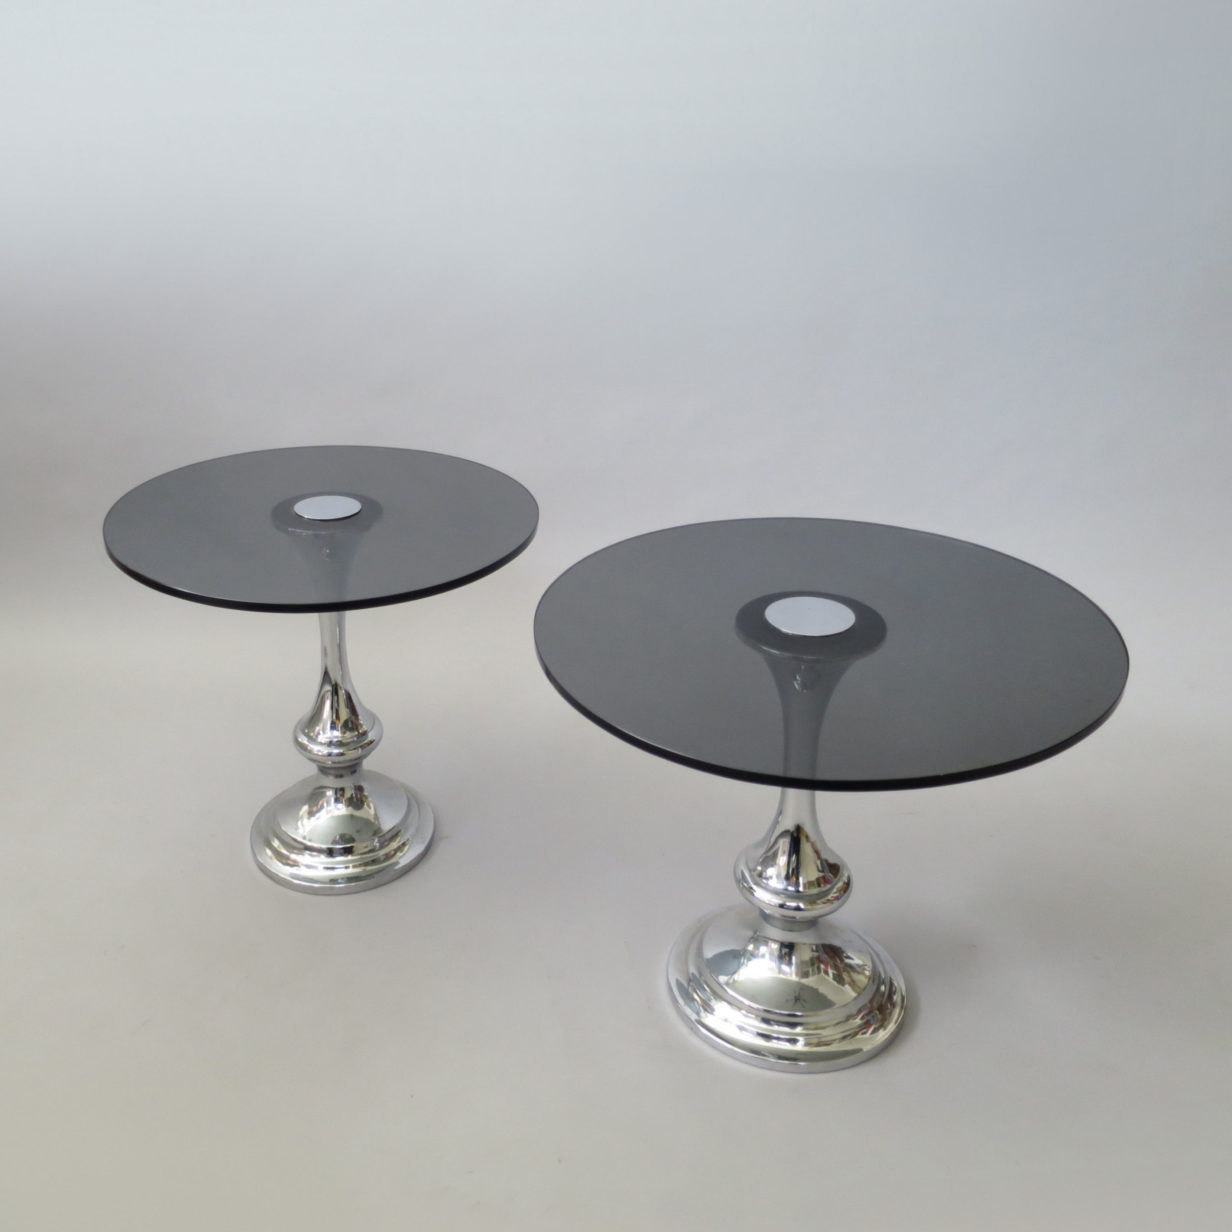 A pair of glass and chrome low tables